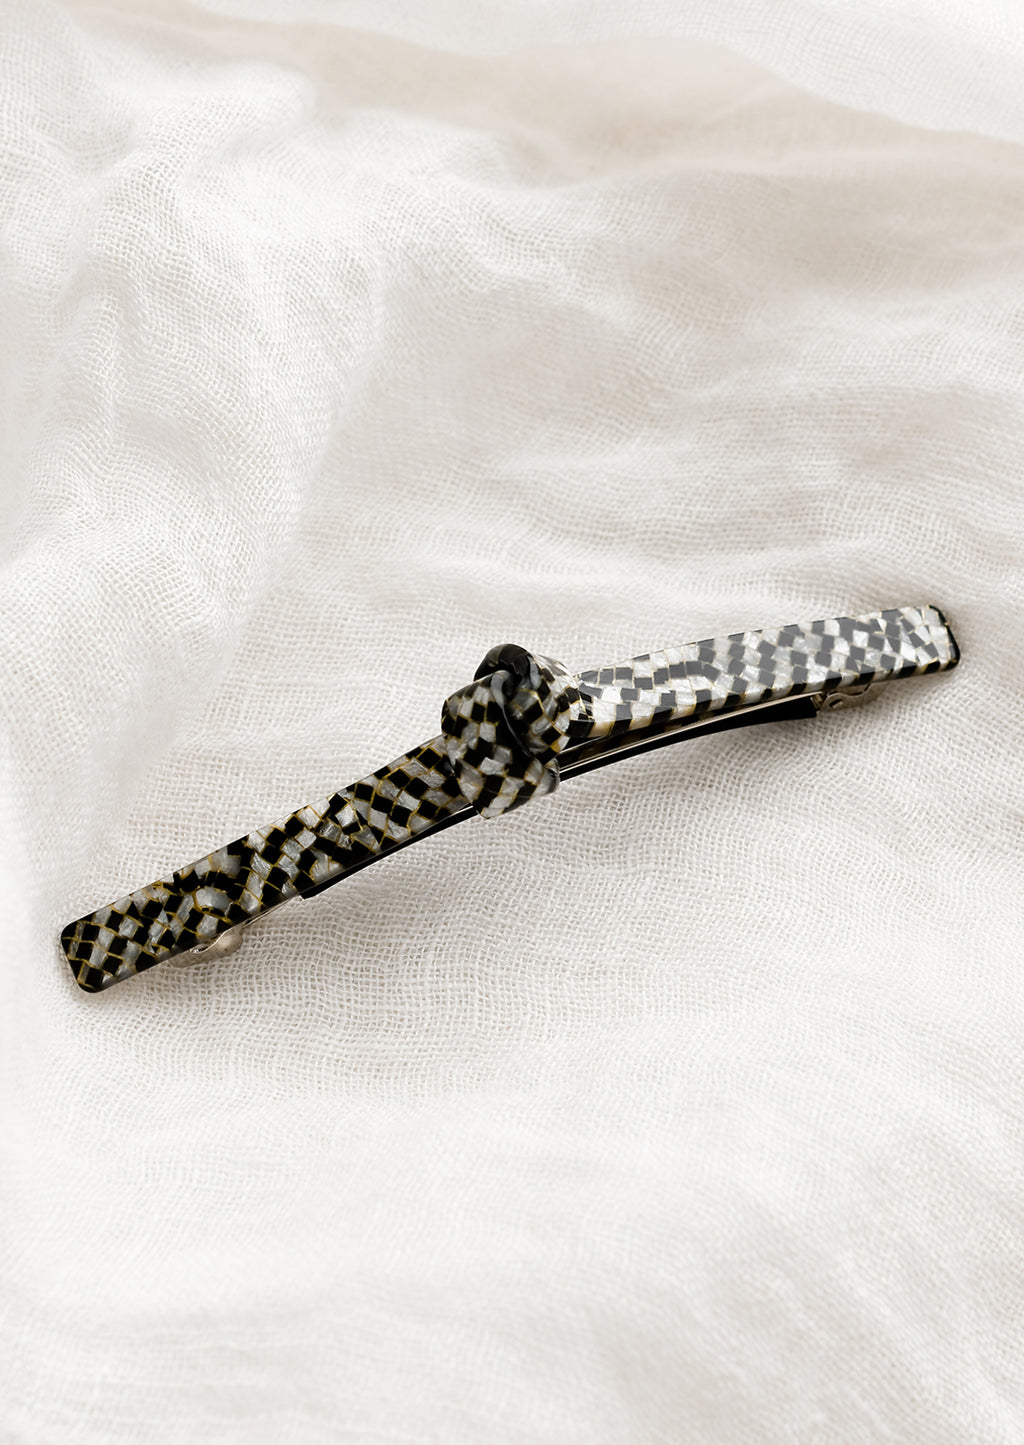 Pearl Checker: Acetate barrette with knot detail in black and white checker